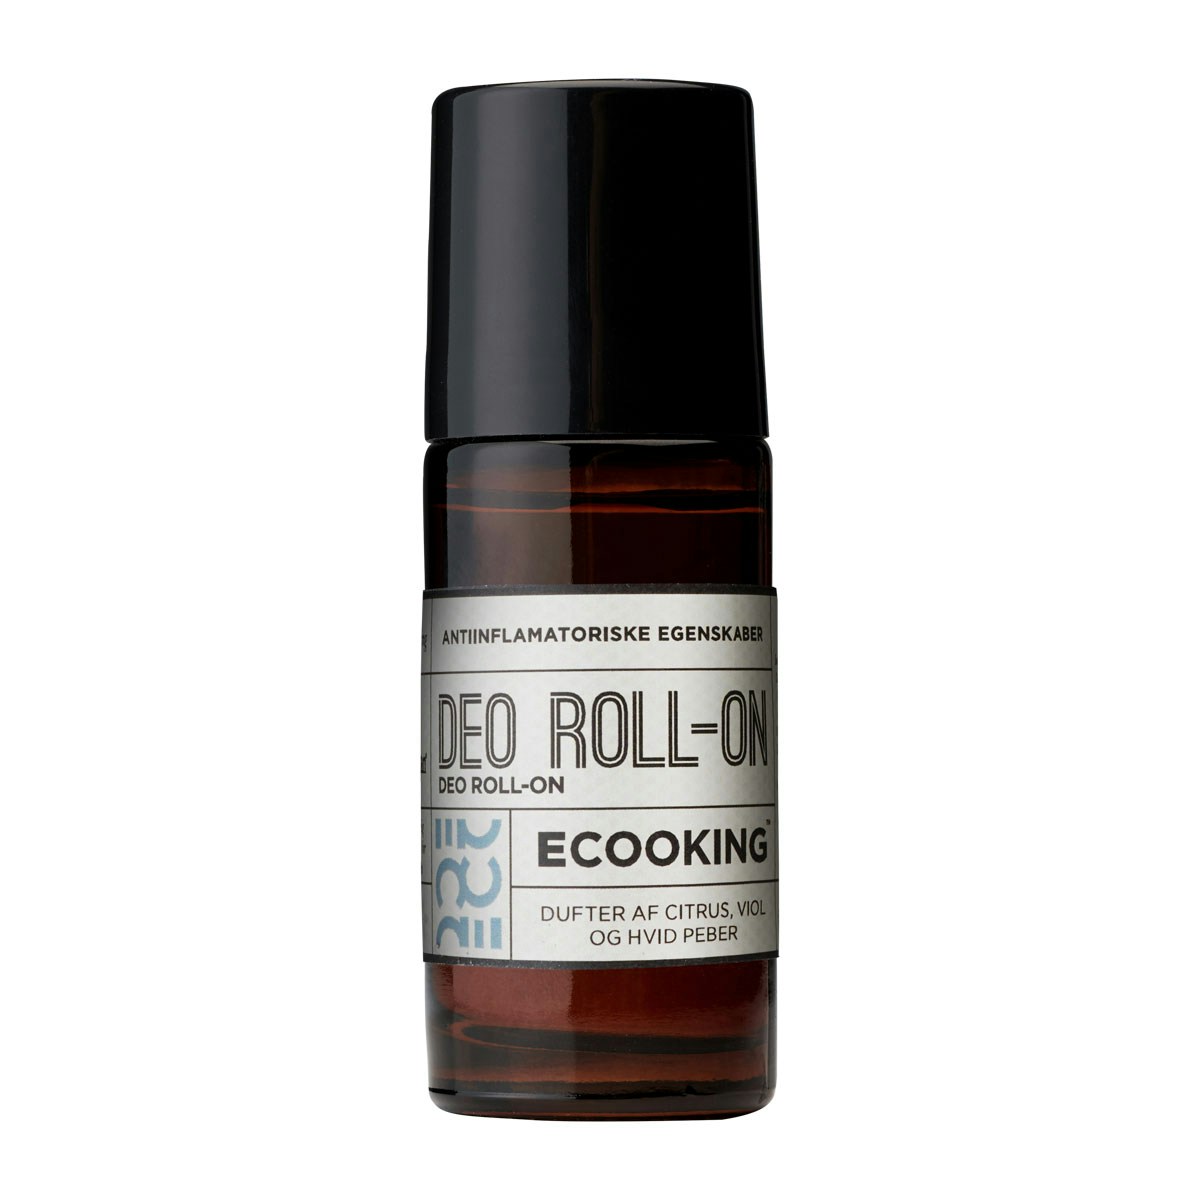 Ecooking Ecooking Deo Roll-on 50ml